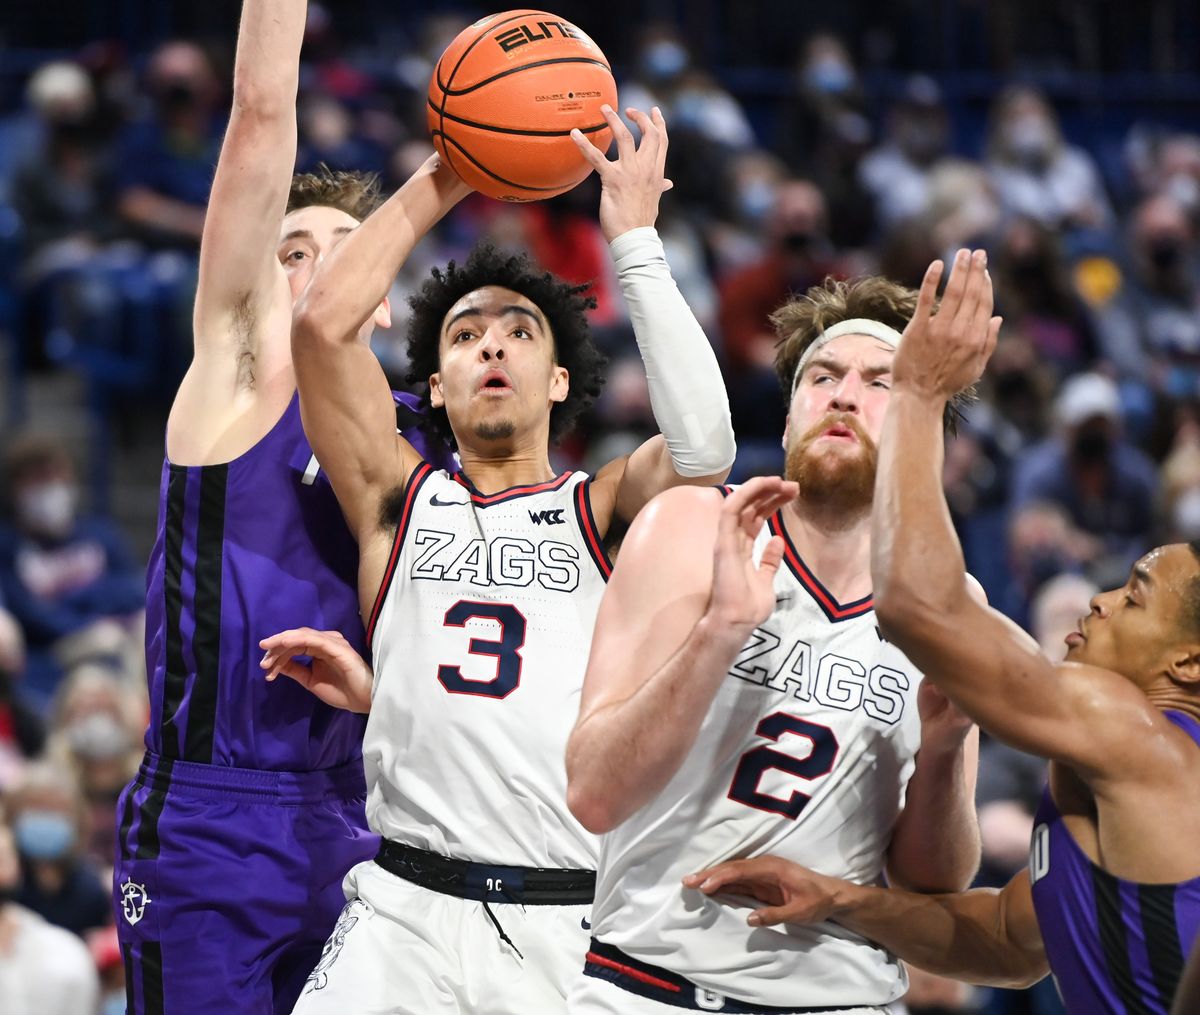 Gonzaga Bulldogs guard Andrew Nembhard (3) drives to the basket and scores against the Portland Pilots during the second half of a college basketball game on Saturday, Jan 29, 2022, at McCarthey Athletic Center in Spokane, Wash. Goznaga won the game 104-72.  (Tyler Tjomsland/The Spokesman-Review)